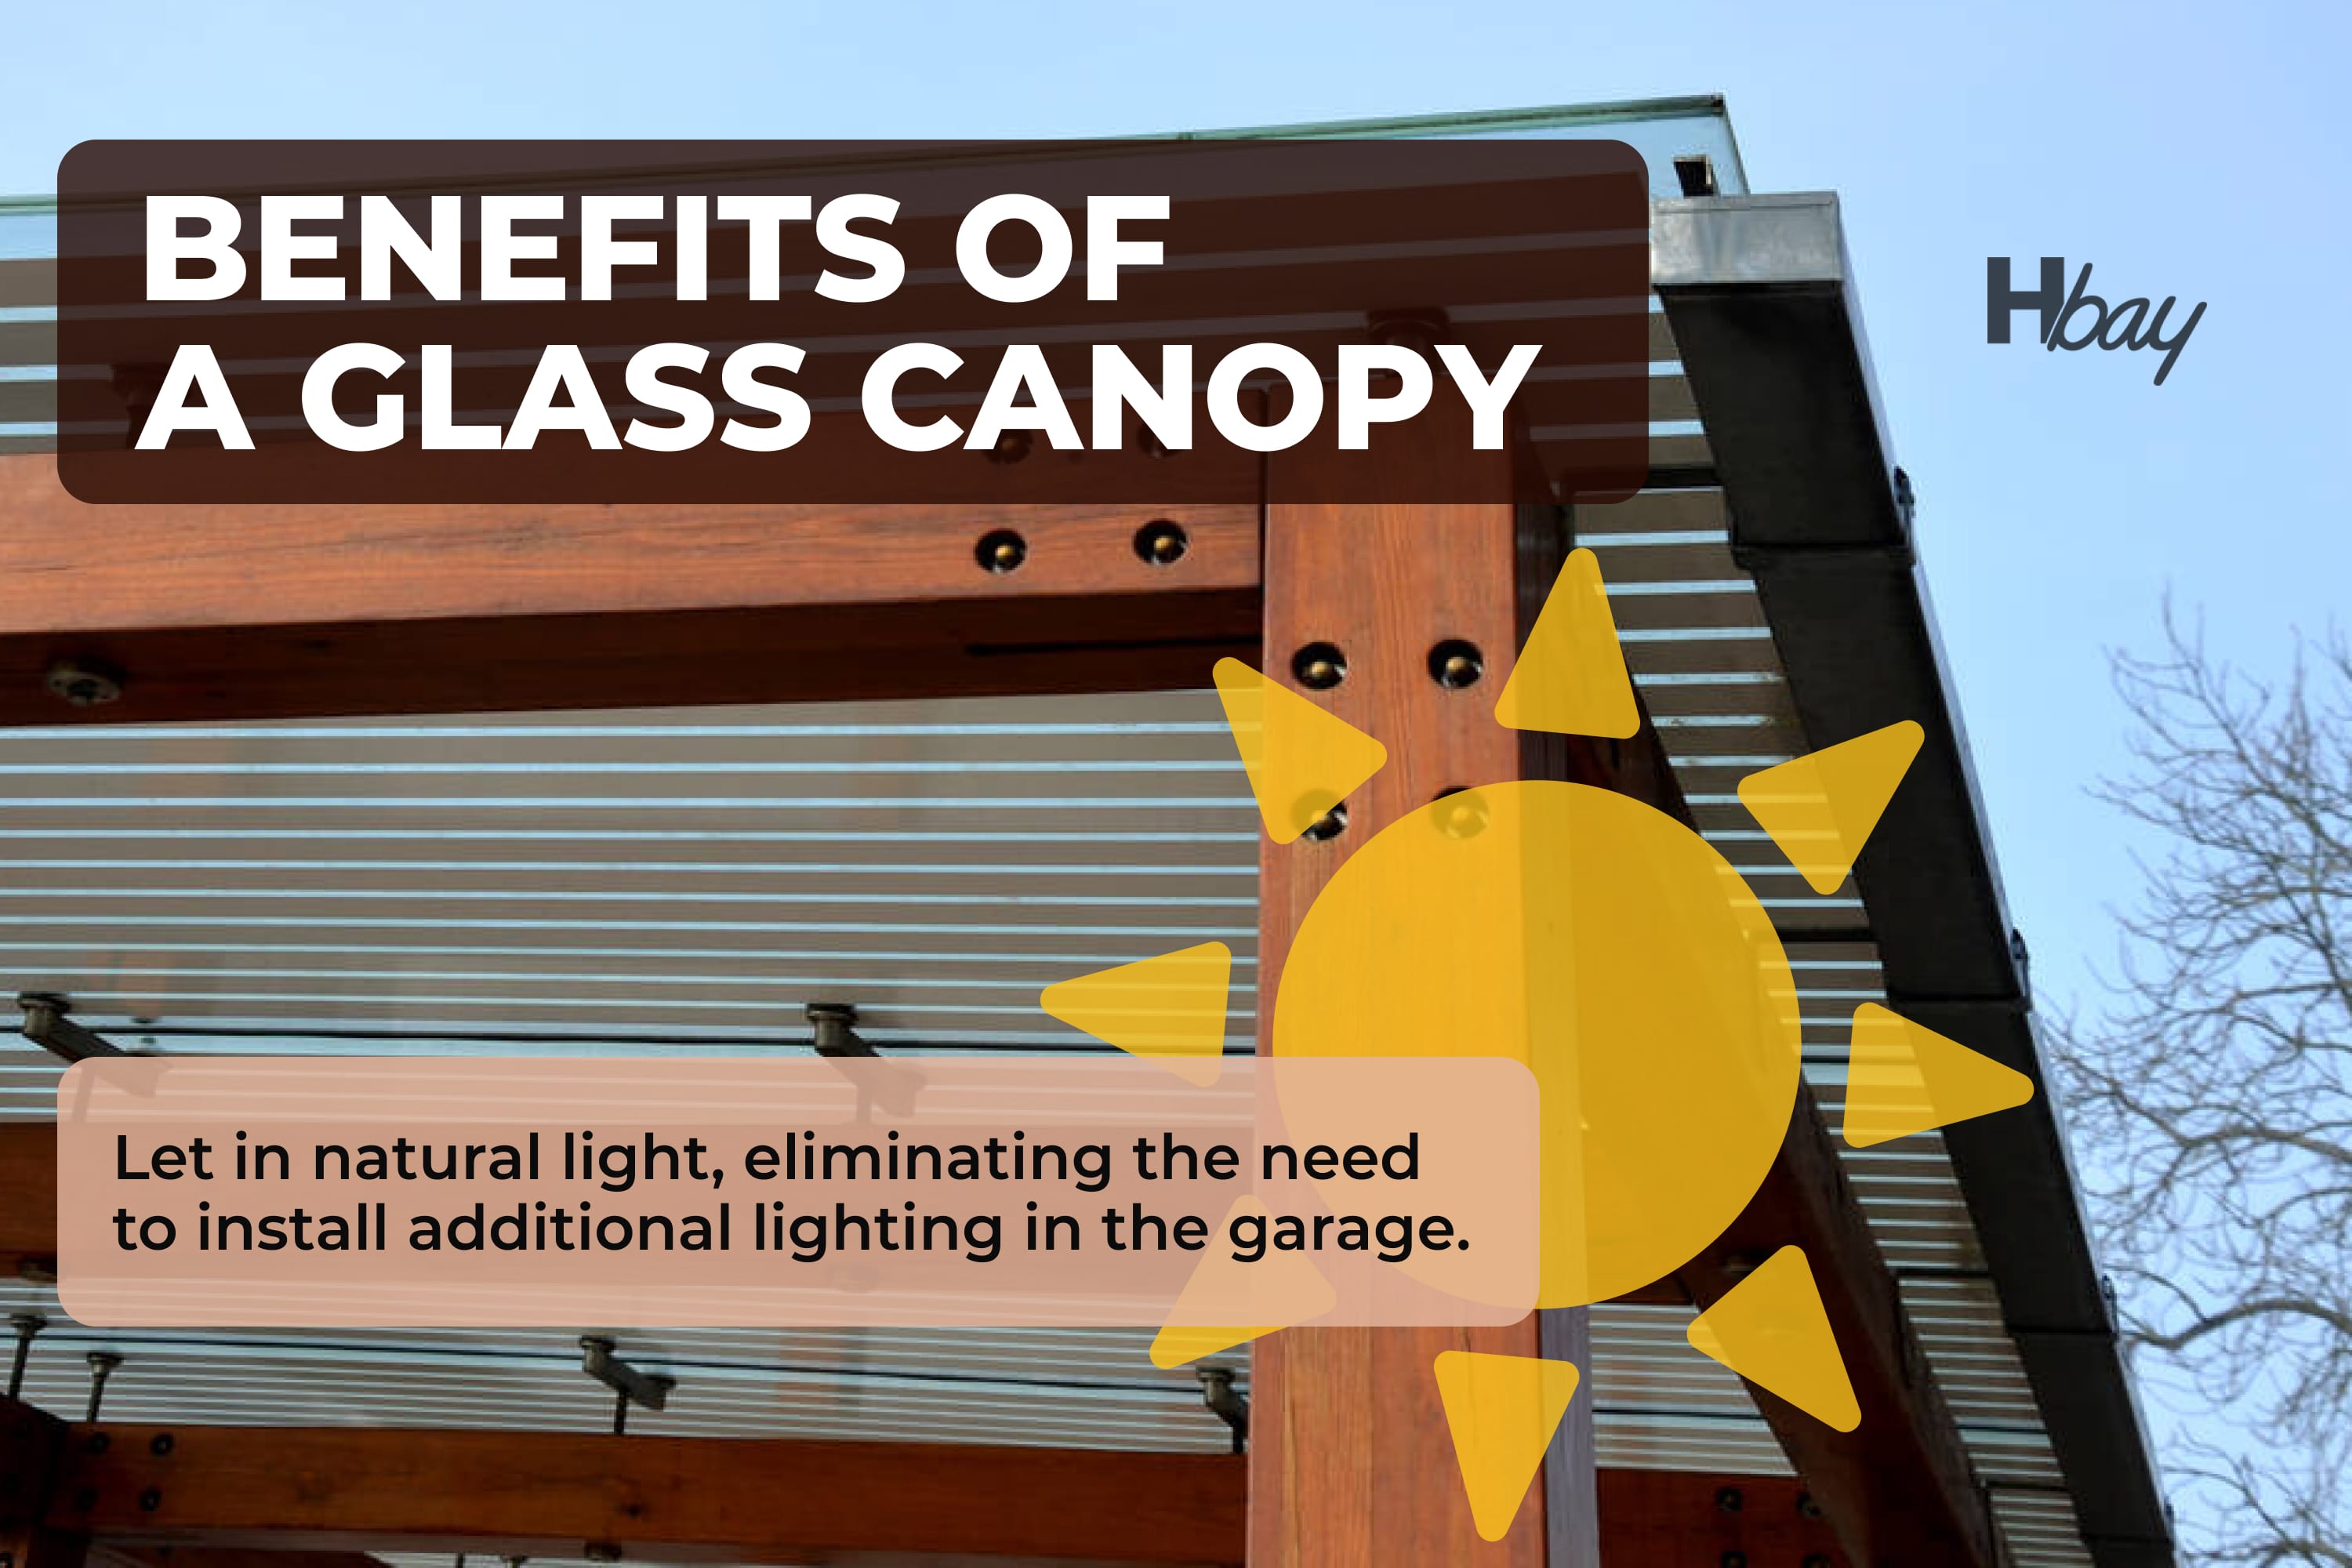 Benefits of a glass canopy